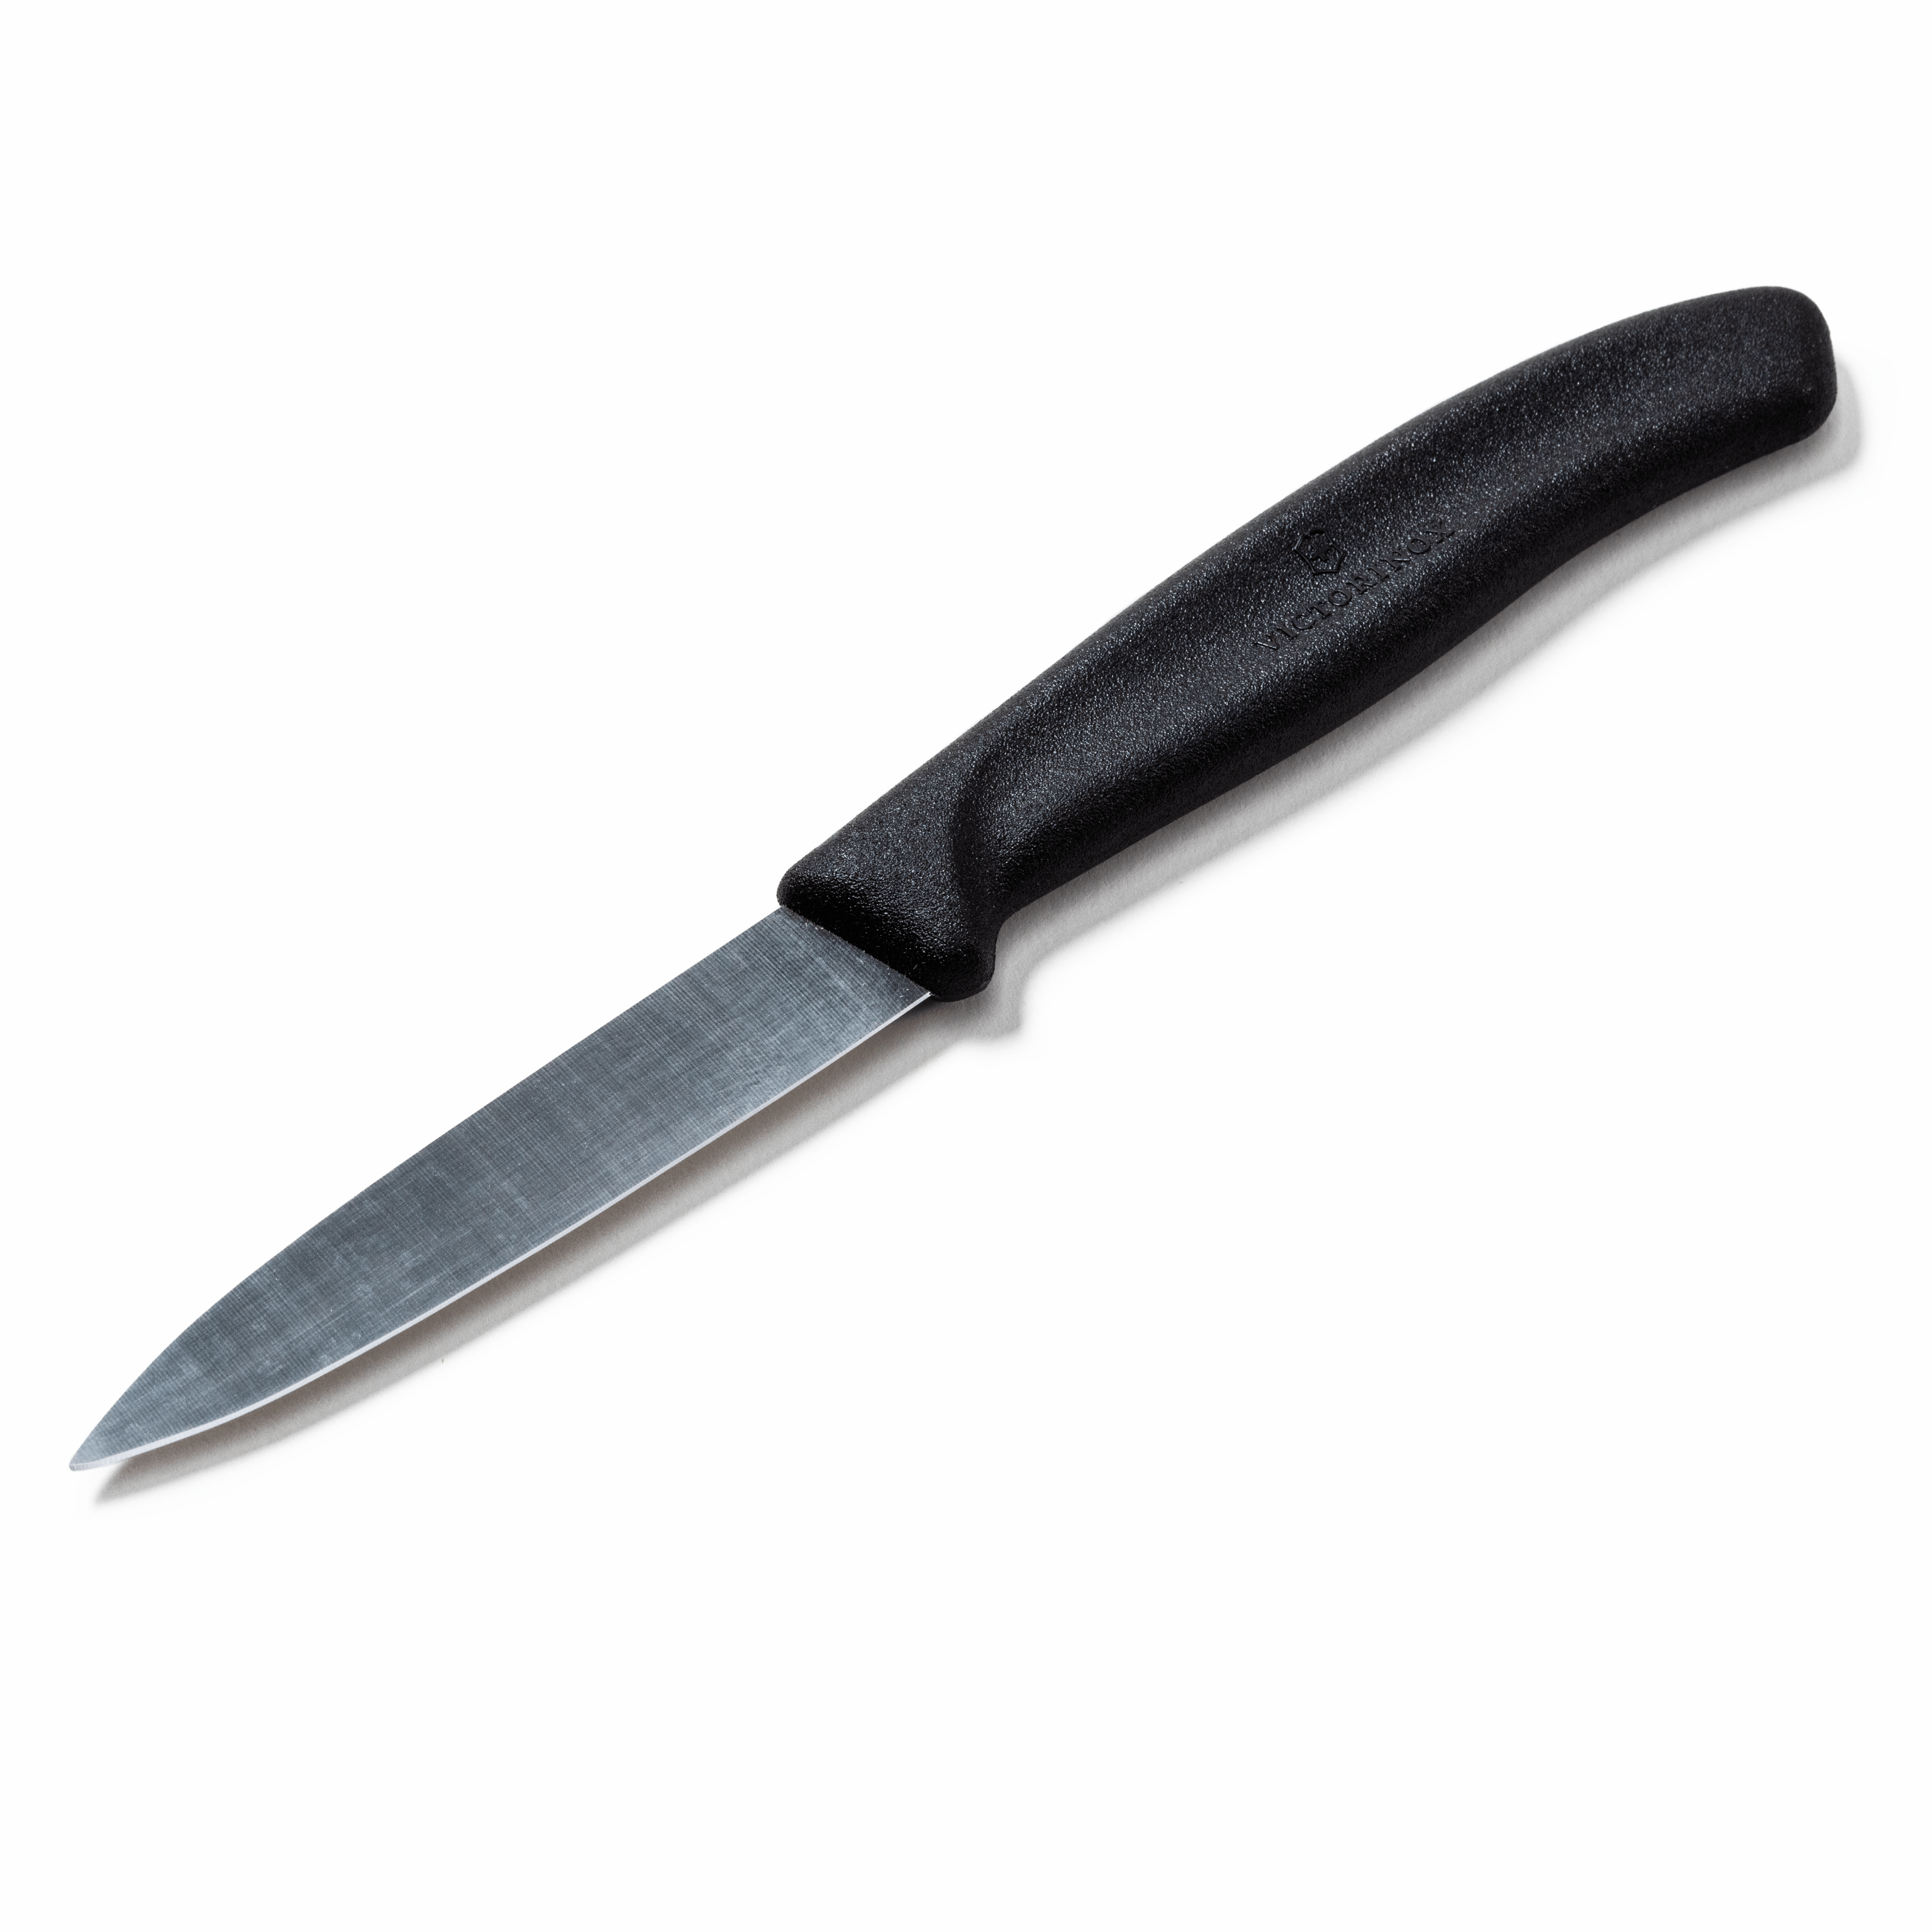 https://res.cloudinary.com/hksqkdlah/image/upload/SIL_Victorinox_SwissClassic-3-14inch-Straight-Spear-Point-Blade_1230_js4l0e.png